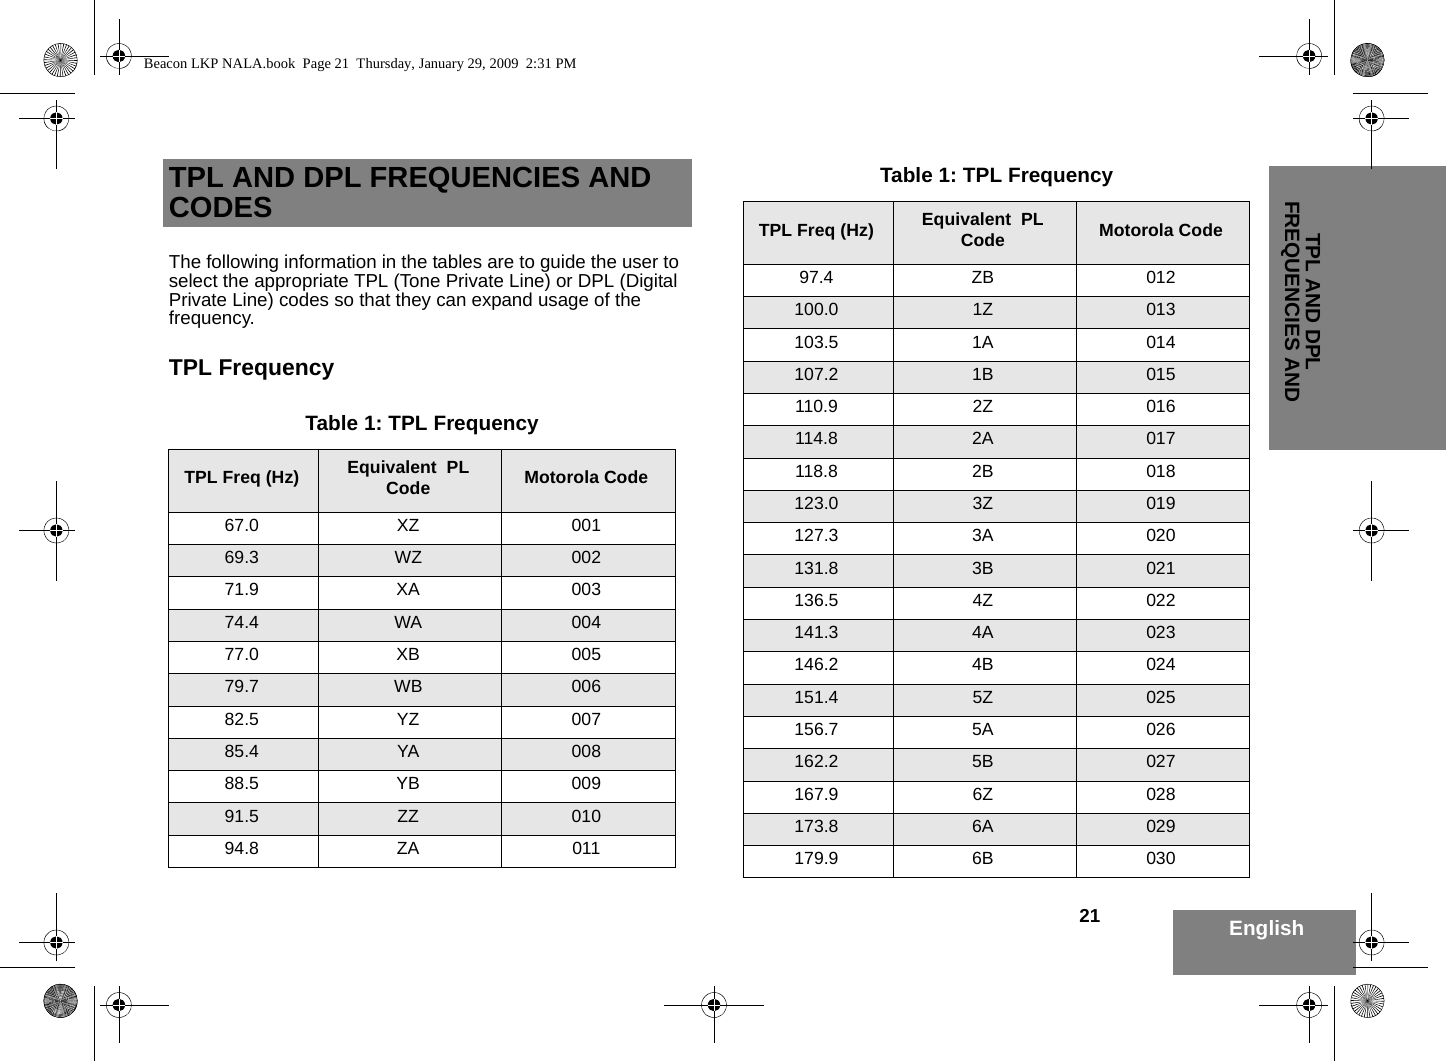 21TPL AND DPL FREQUENCIES AND EnglishTPL AND DPL FREQUENCIES AND CODESThe following information in the tables are to guide the user to select the appropriate TPL (Tone Private Line) or DPL (Digital Private Line) codes so that they can expand usage of the frequency. TPL FrequencyTable 1: TPL FrequencyTPL Freq (Hz) Equivalent  PL Code Motorola Code67.0 XZ 00169.3 WZ 00271.9 XA 00374.4 WA 00477.0 XB 00579.7 WB 00682.5 YZ 00785.4 YA 00888.5 YB 00991.5 ZZ 01094.8 ZA 01197.4 ZB 012100.0 1Z 013103.5 1A 014107.2 1B 015110.9 2Z 016114.8 2A 017118.8 2B 018123.0 3Z 019127.3 3A 020131.8 3B 021136.5 4Z 022141.3 4A 023146.2 4B 024151.4 5Z 025156.7 5A 026162.2 5B 027167.9 6Z 028173.8 6A 029179.9 6B 030Table 1: TPL FrequencyTPL Freq (Hz) Equivalent  PL Code Motorola CodeBeacon LKP NALA.book  Page 21  Thursday, January 29, 2009  2:31 PM